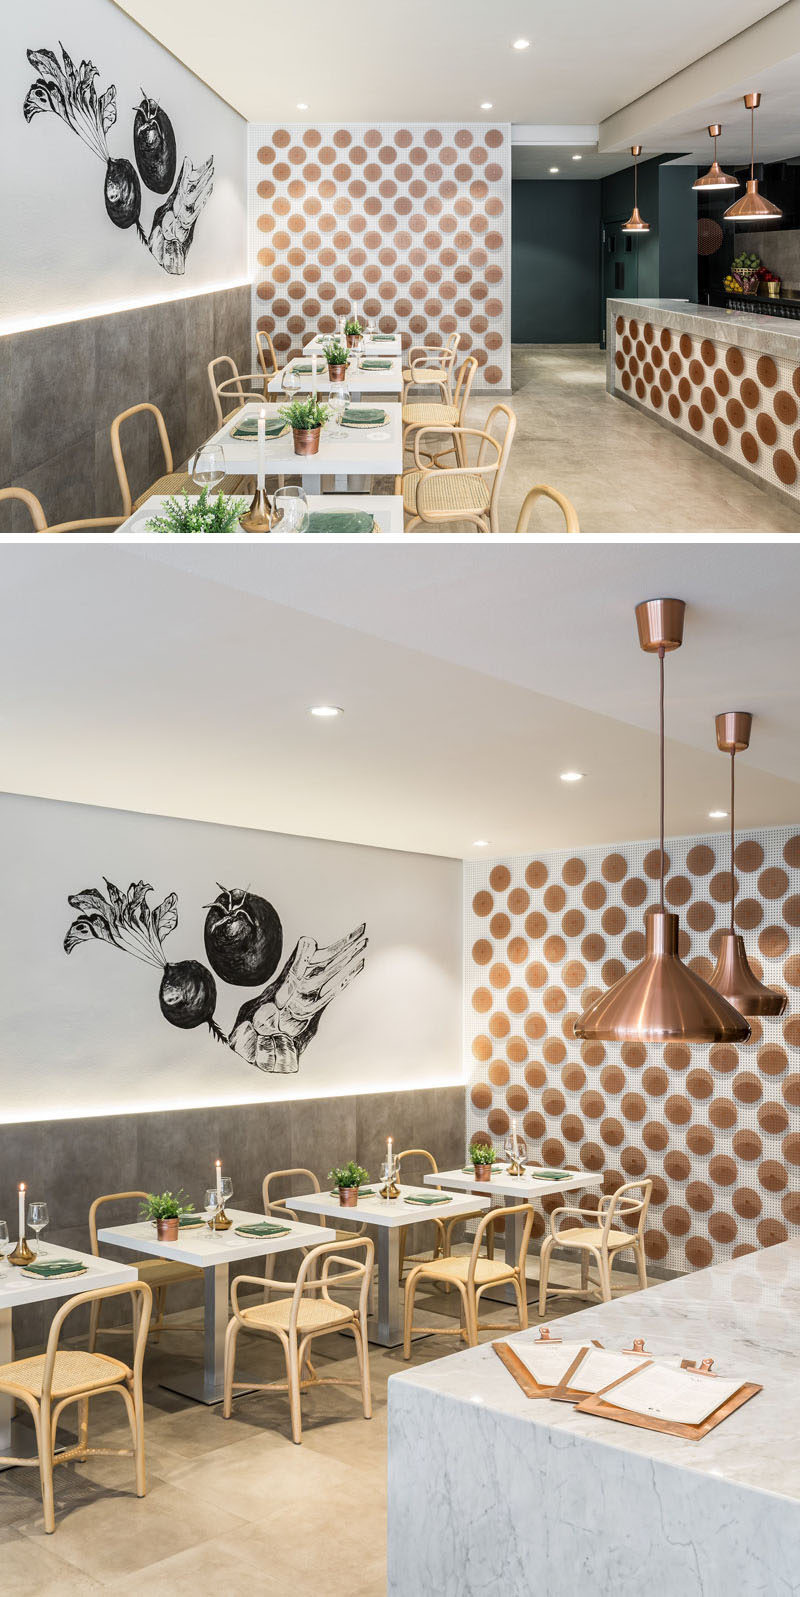 Over 200 perforated copper discs cover the wall and the front of the open kitchen in this restaurant.